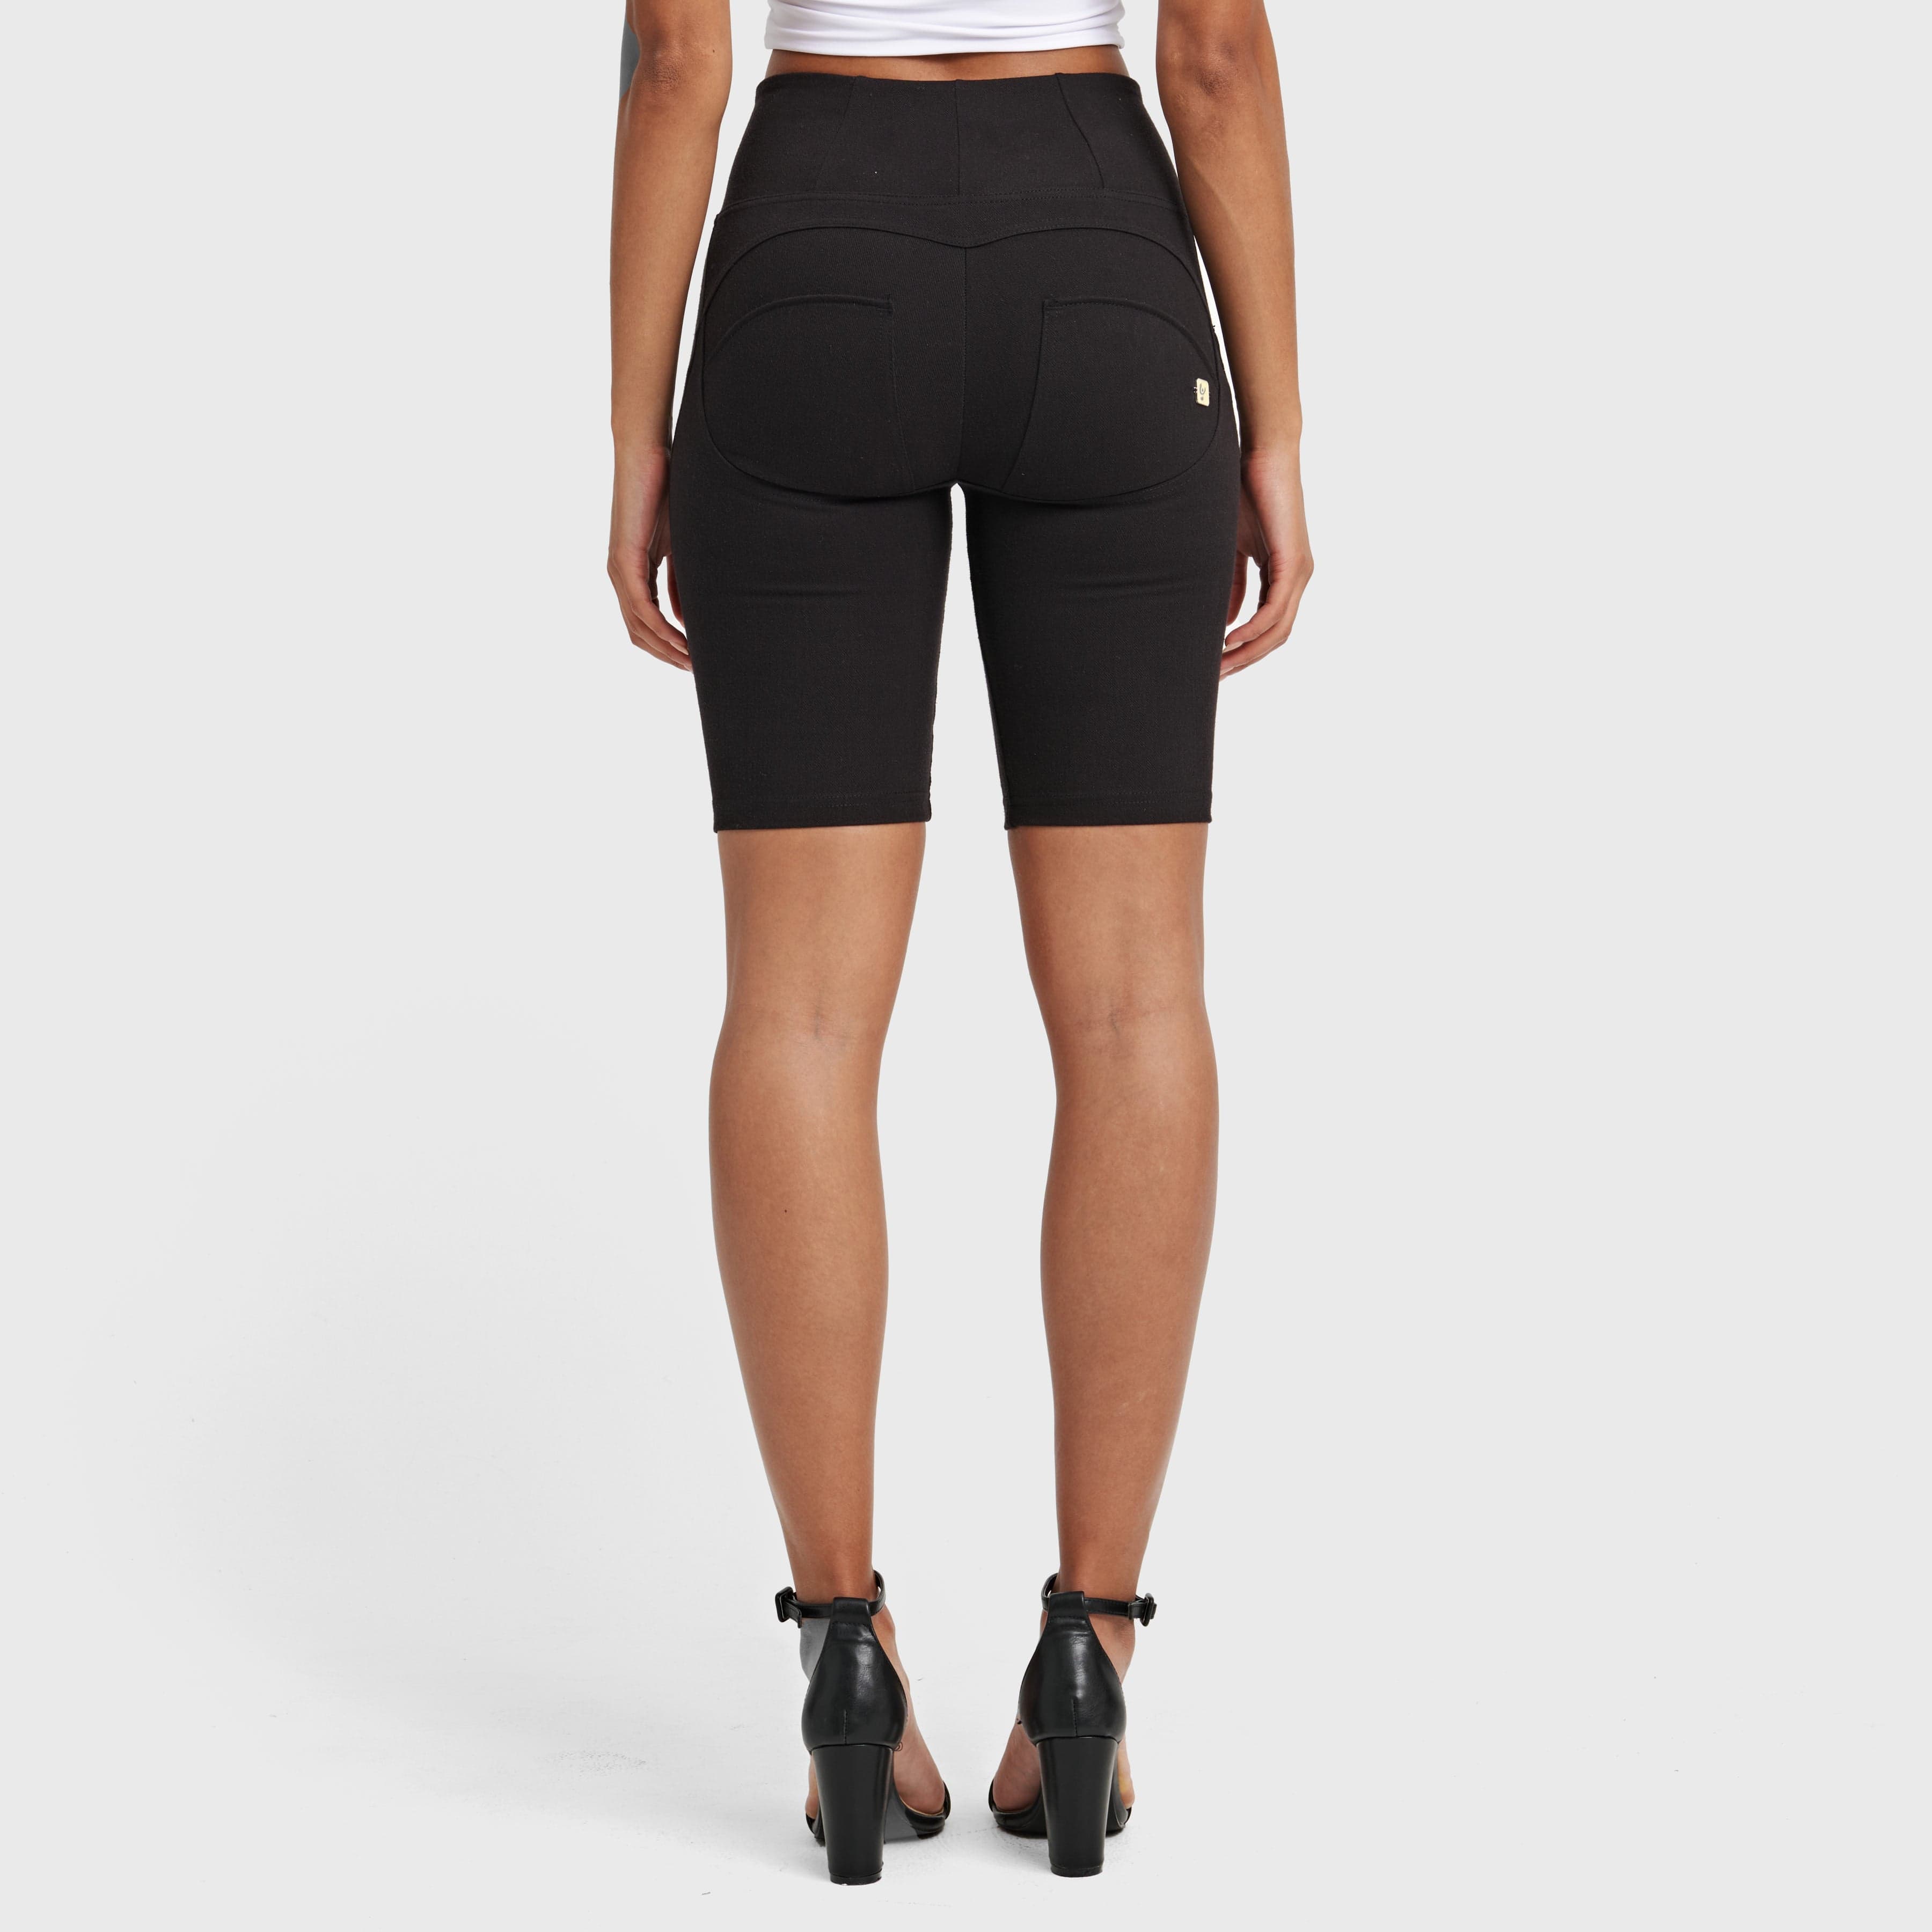 WR.UP® Drill Limited Edition - High Waisted - Biker Shorts - Black 3